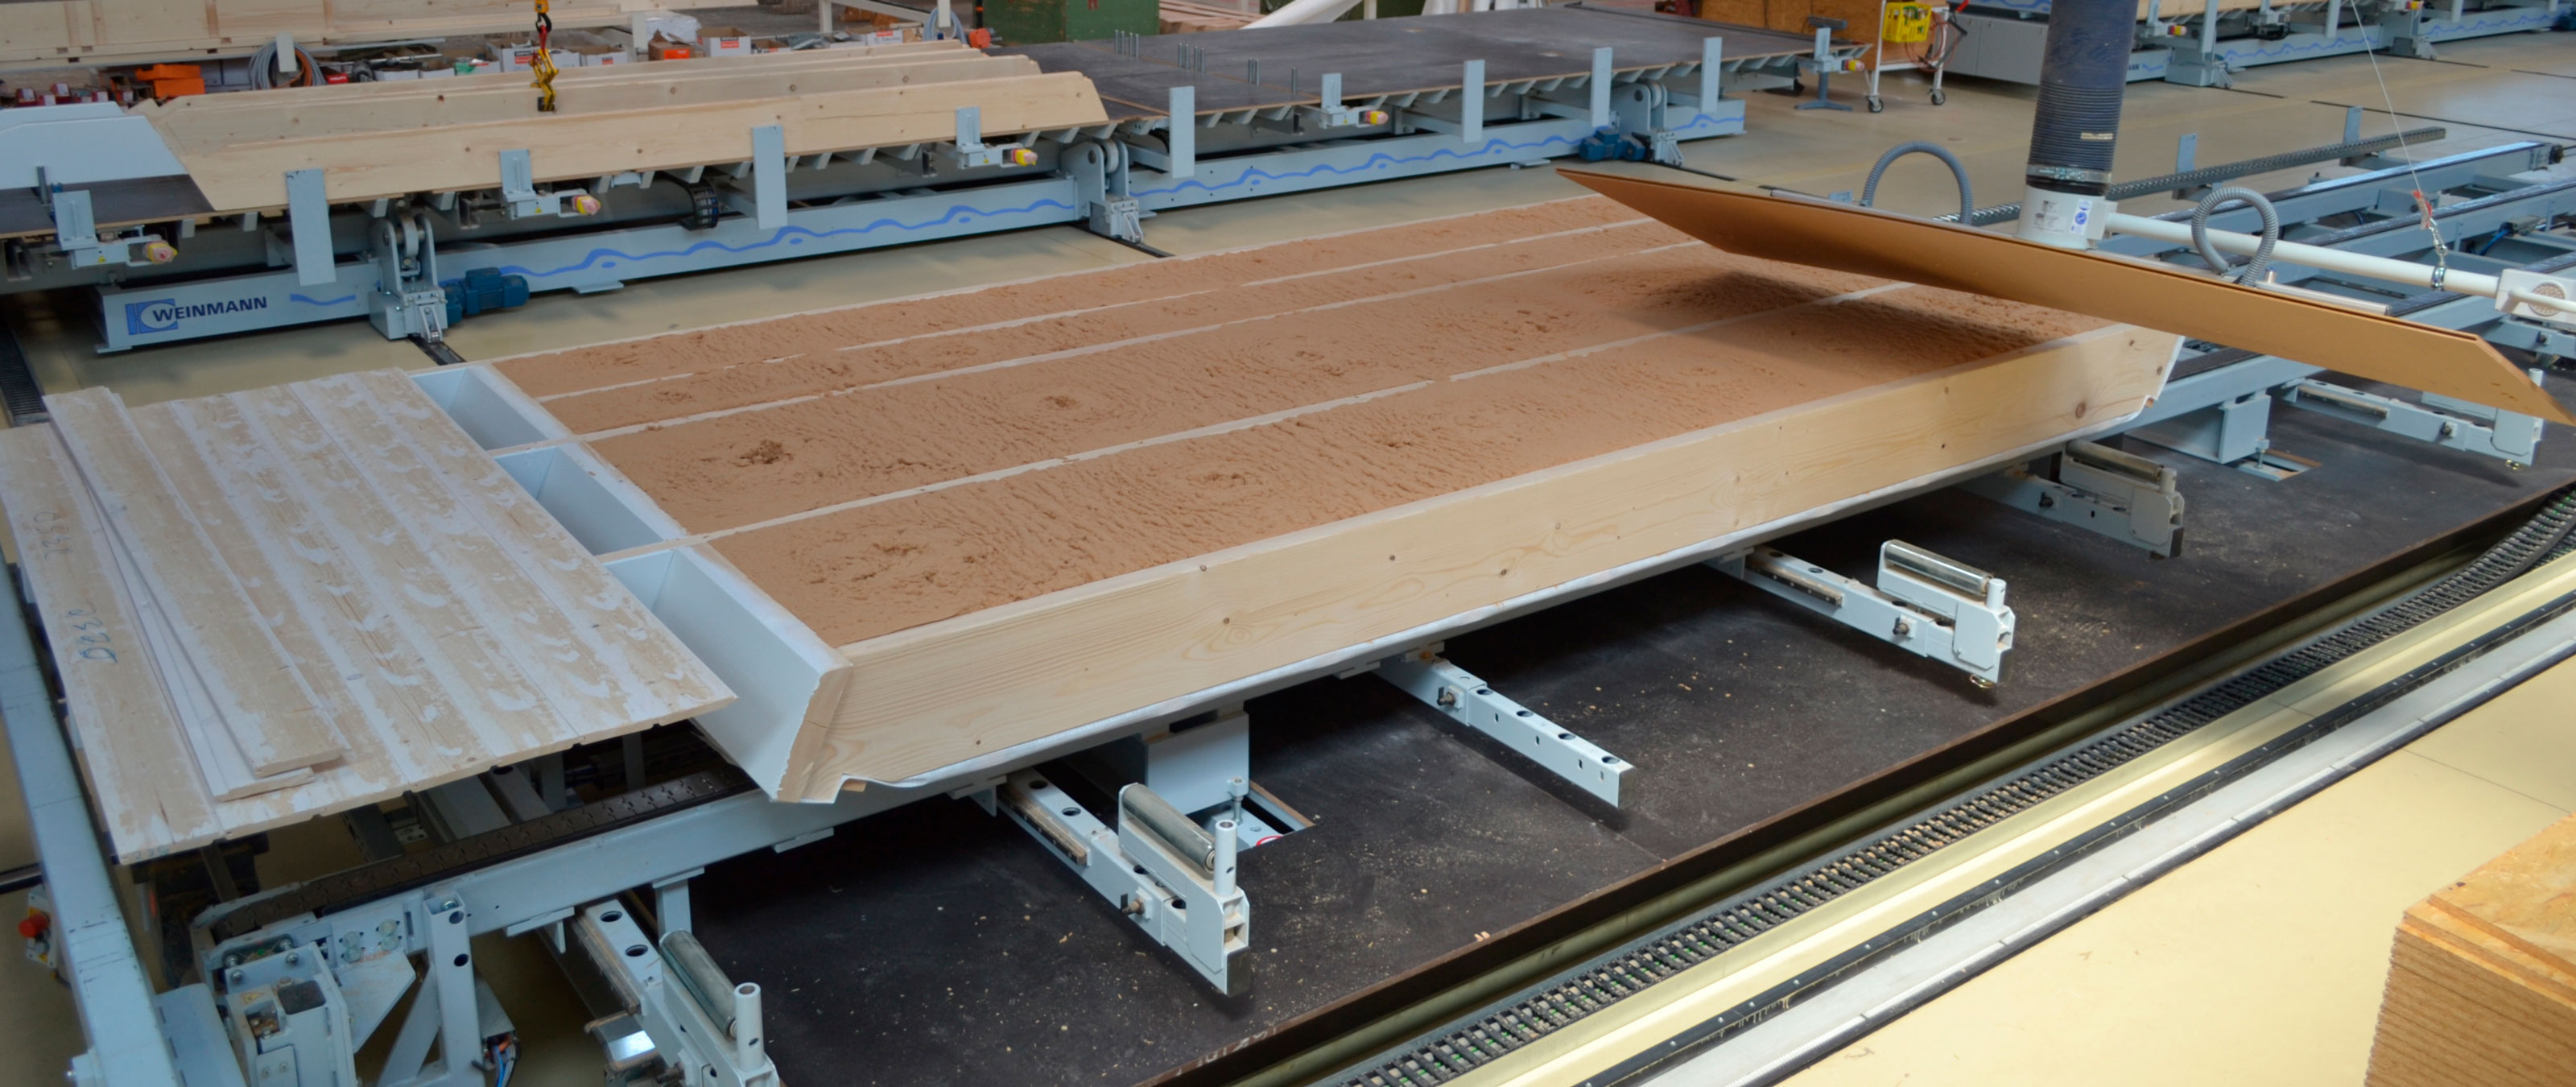 WEINMANN Roof and ceiling production line